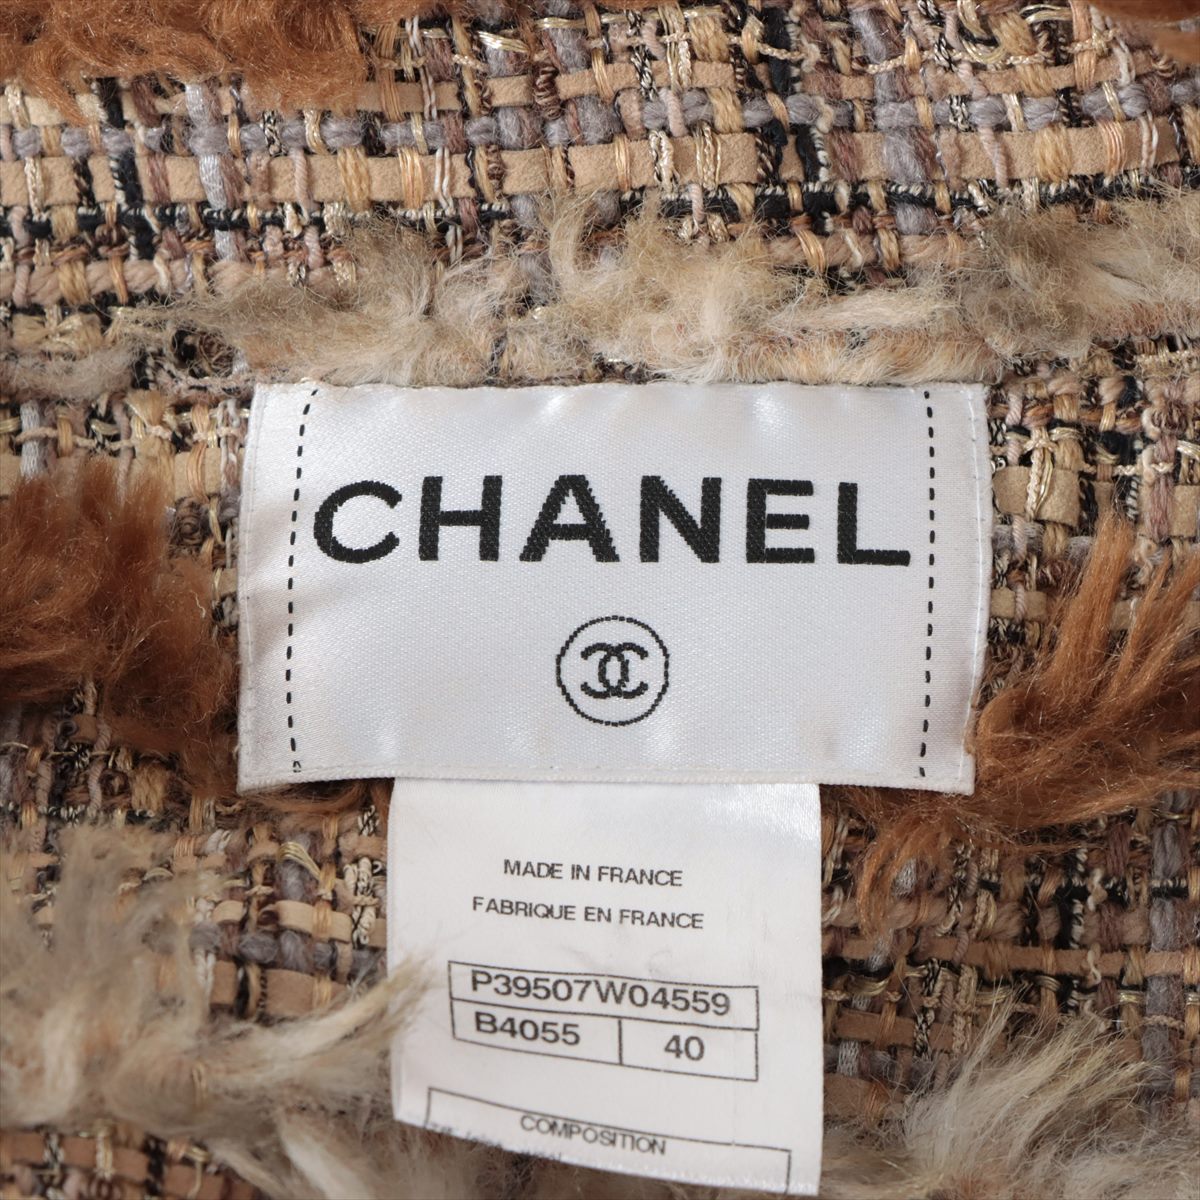 Chanel Coco Button P39 wool x acrylic Jacket 40 Ladies' Brown  P39507 belted Faux fur Buckle parts missing